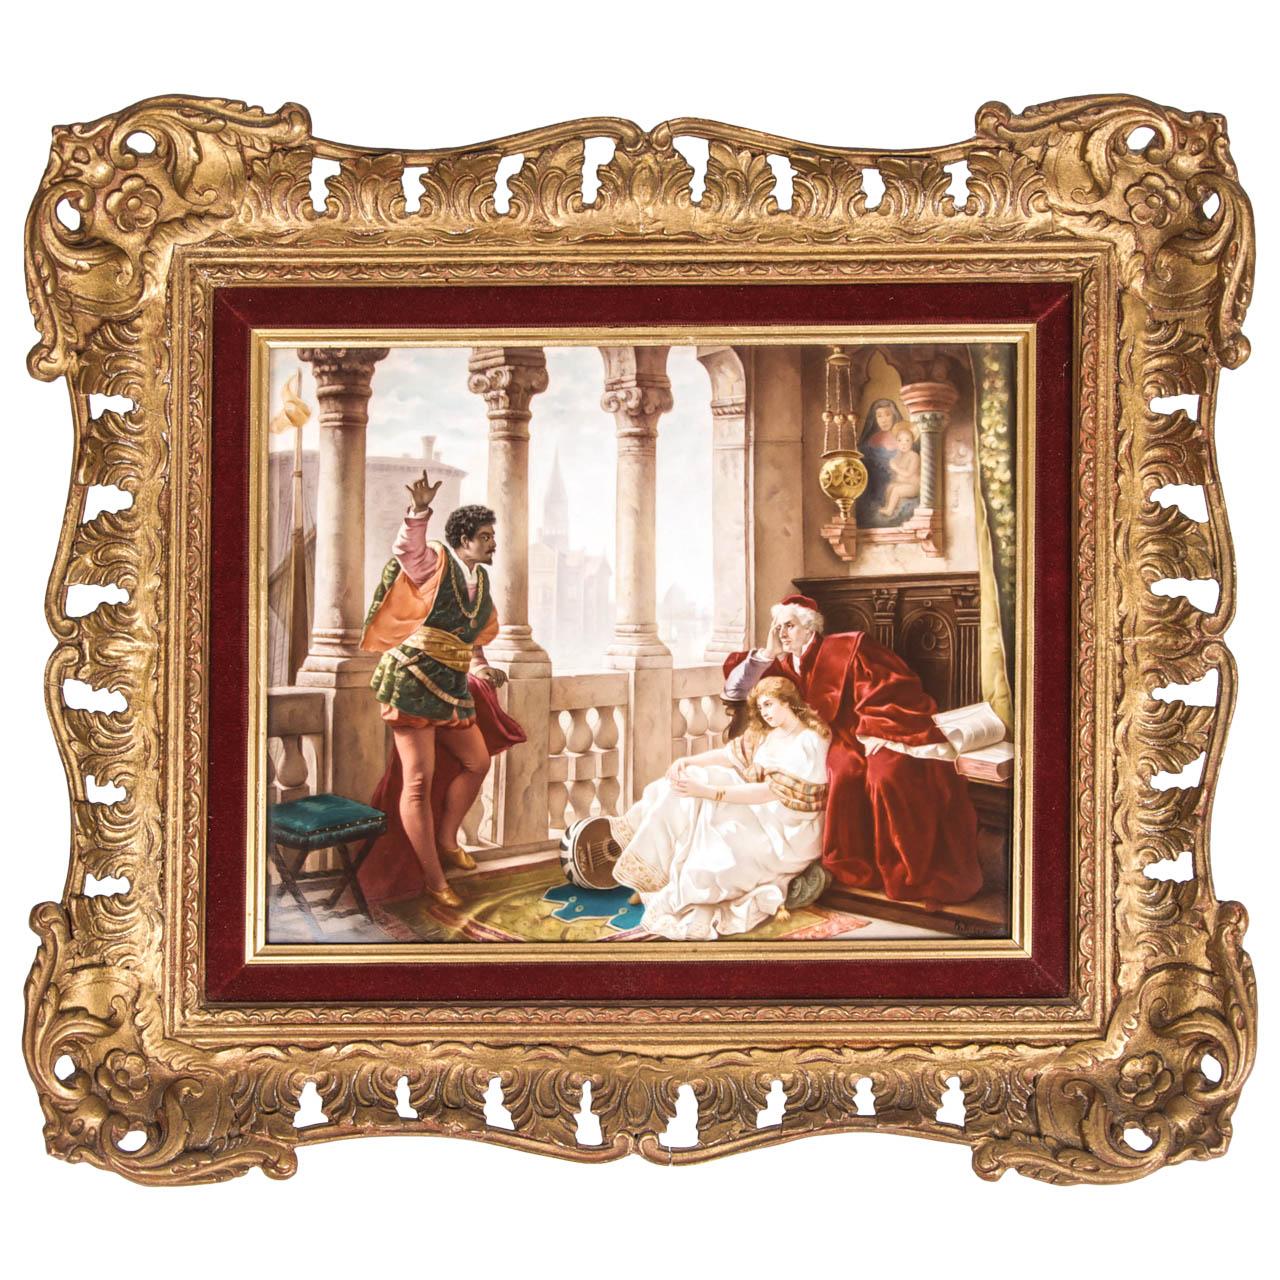 A fine KPM porcelain plaque depicting a scene from Shakespeare's Play Othello, after the painting by Carl Ludwig Friedrich Becker, (German, 1820-1900). 

Signed ‘R. Wagner’. 

Impressed mark to the reverse ‘KPM’ (Konigliche